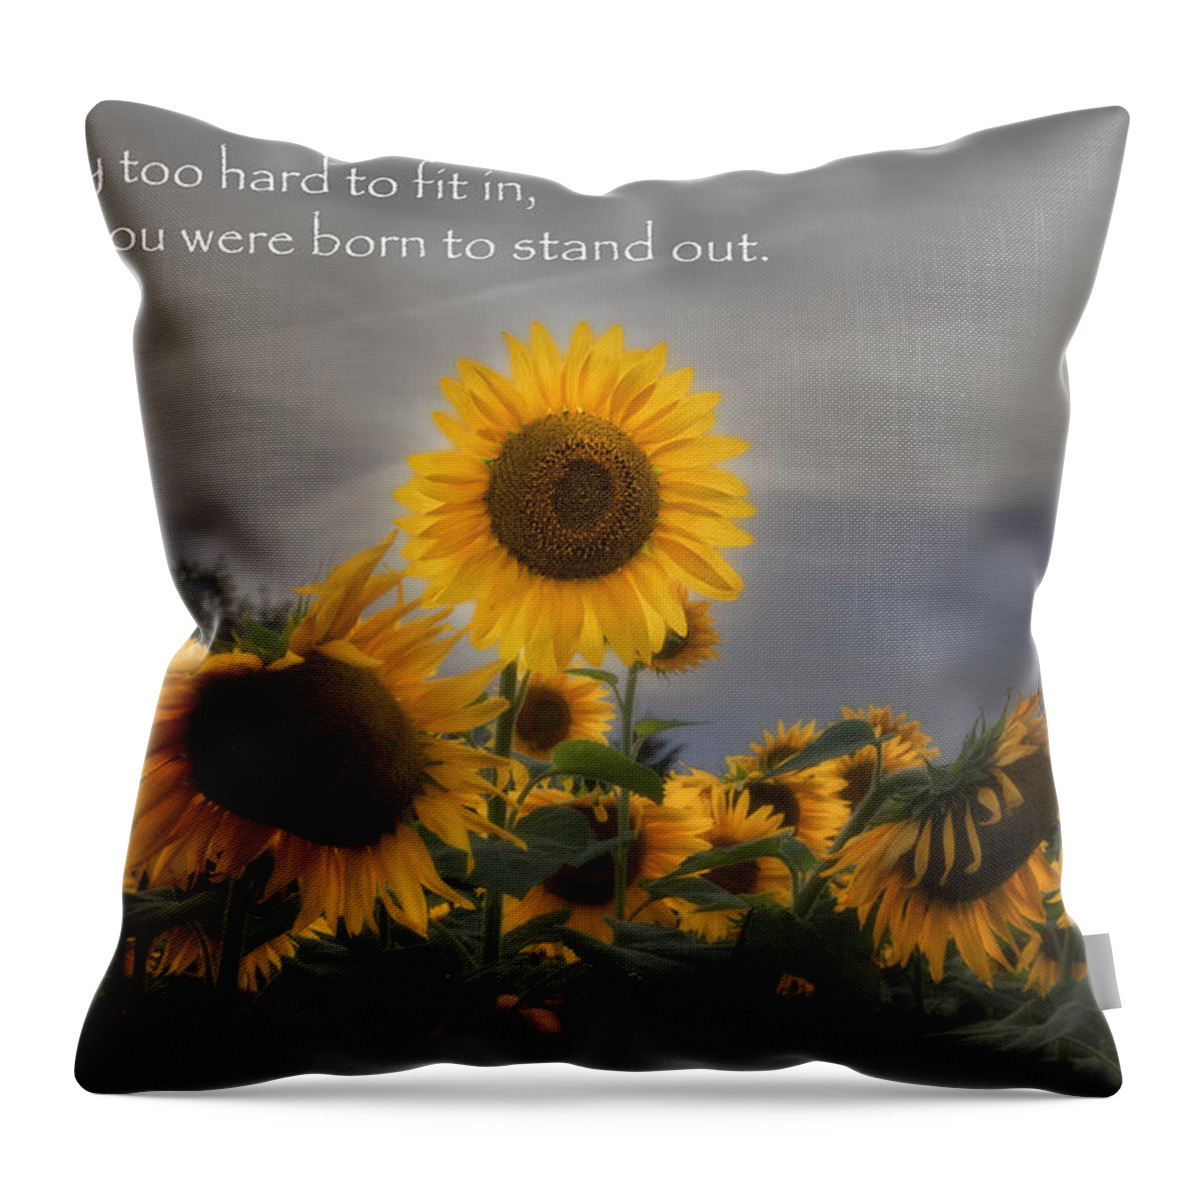 Motivational Throw Pillow featuring the photograph Stand Out by Bill Wakeley